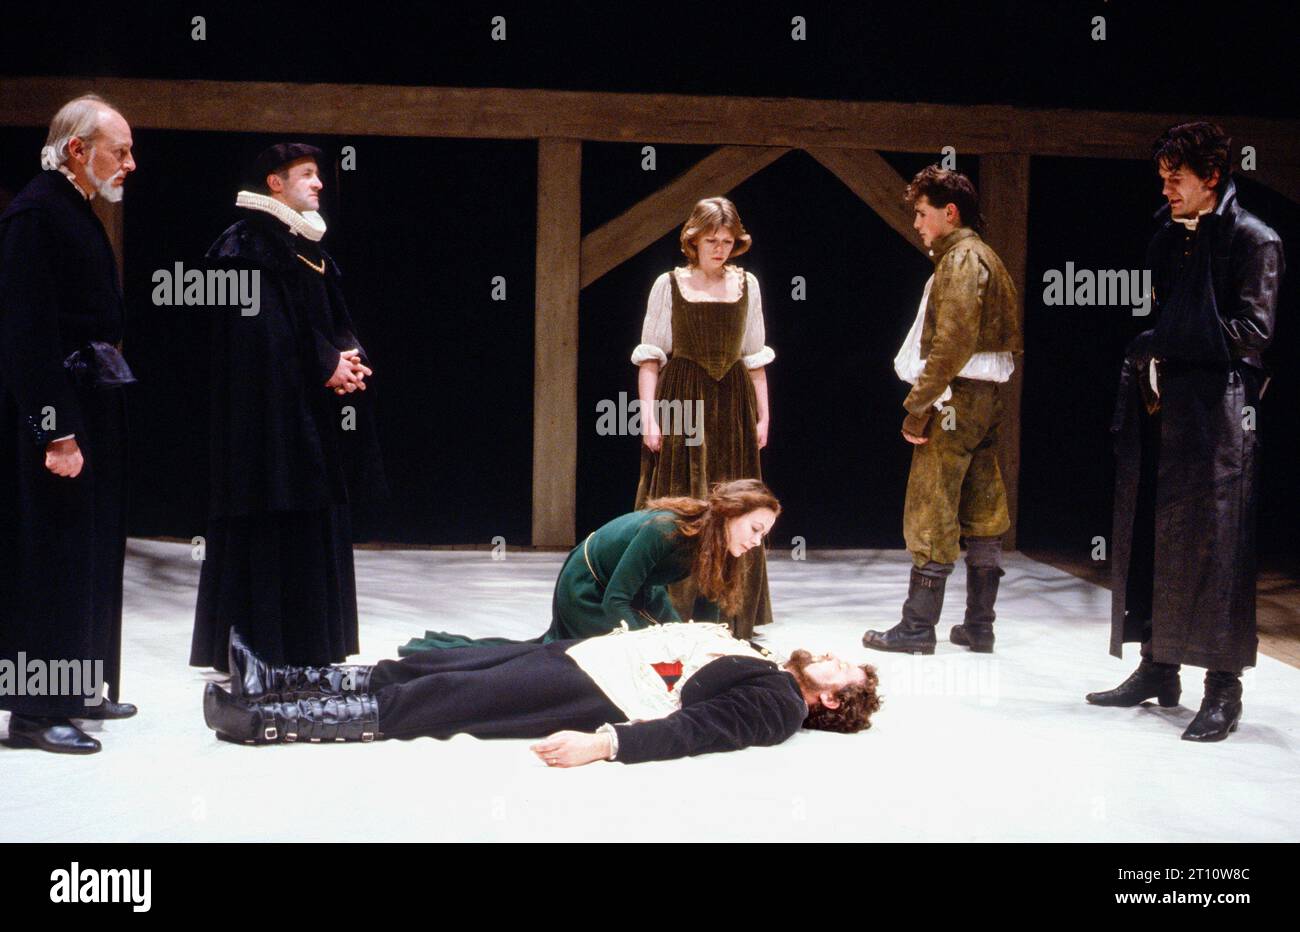 debout, de gauche à droite : Jeffery Dench (Franklin), Paul Webster (maire), Cathy Finlay (Susan), Mark Rylance (Michael), Robert O'Mahoney (Mosby) avant centre : Jenny Agutter (Alice), Bruce PURCHASE (Arden) dans ARDEN OF FAVERSHAM par Anonymous Fights at the Royal Shakespeare Company (RSC), The Other place, Stratford-upon-Avon-Avon-Avon-Avon-Avon-Avon-England, Angleterre 30/03/1982 Ian McKay réalisateur : Terry Hands Banque D'Images